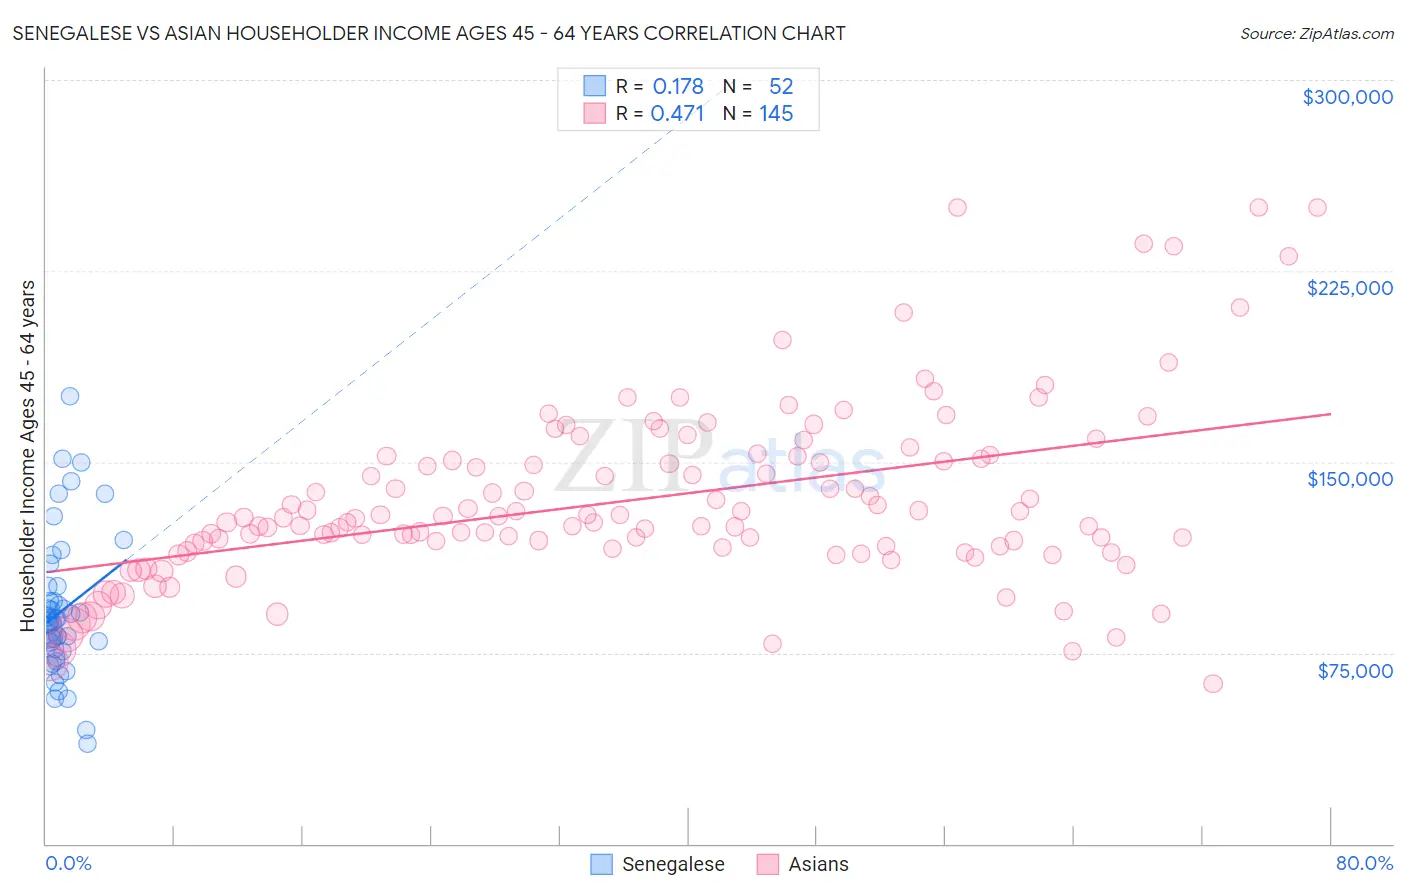 Senegalese vs Asian Householder Income Ages 45 - 64 years